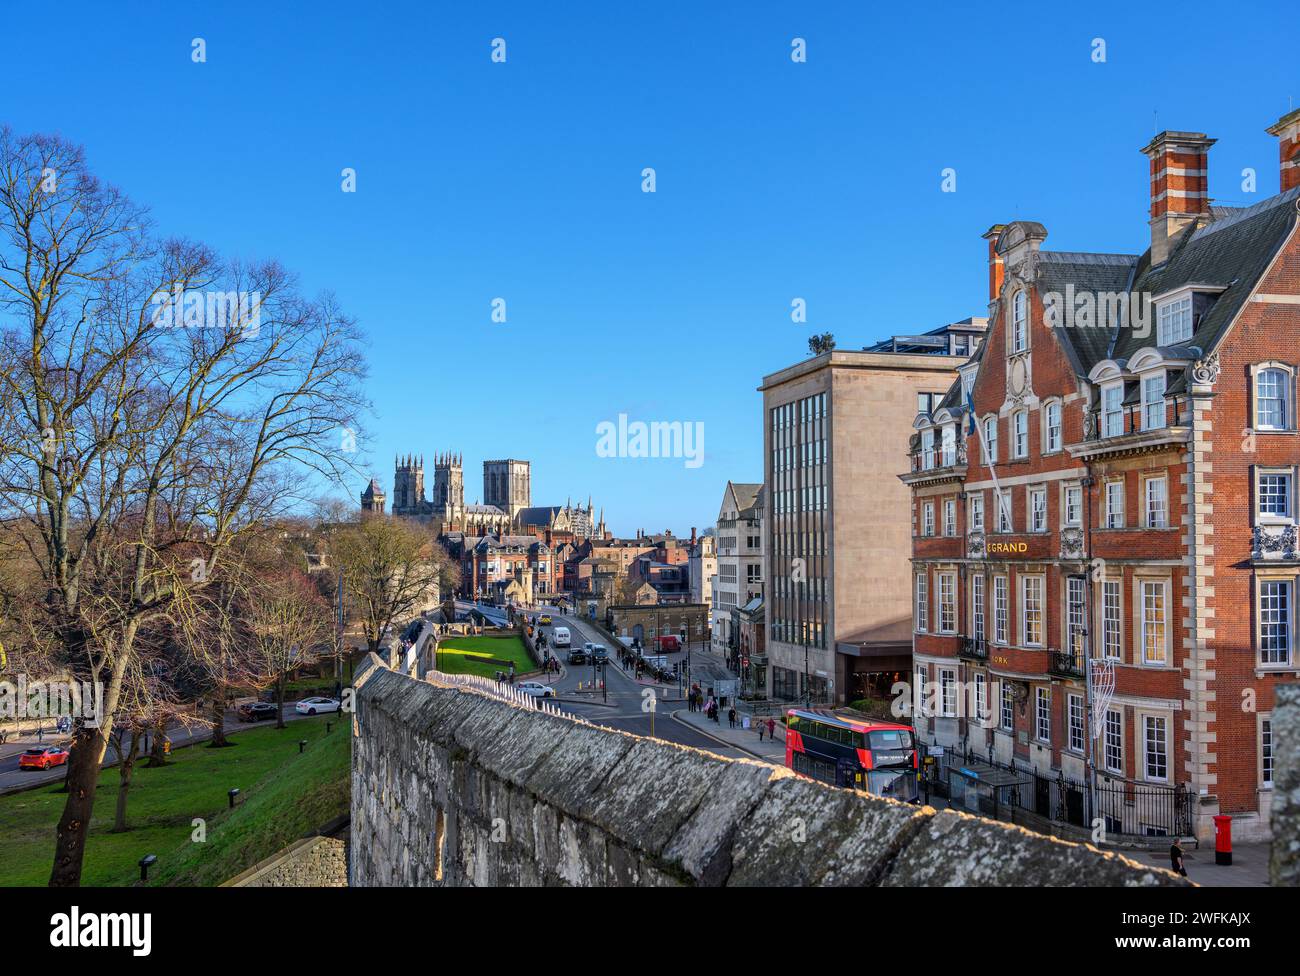 The City Wall Walk looking towards York Minster, with the Grand Hotel on the right, York, England, UK. Stock Photo